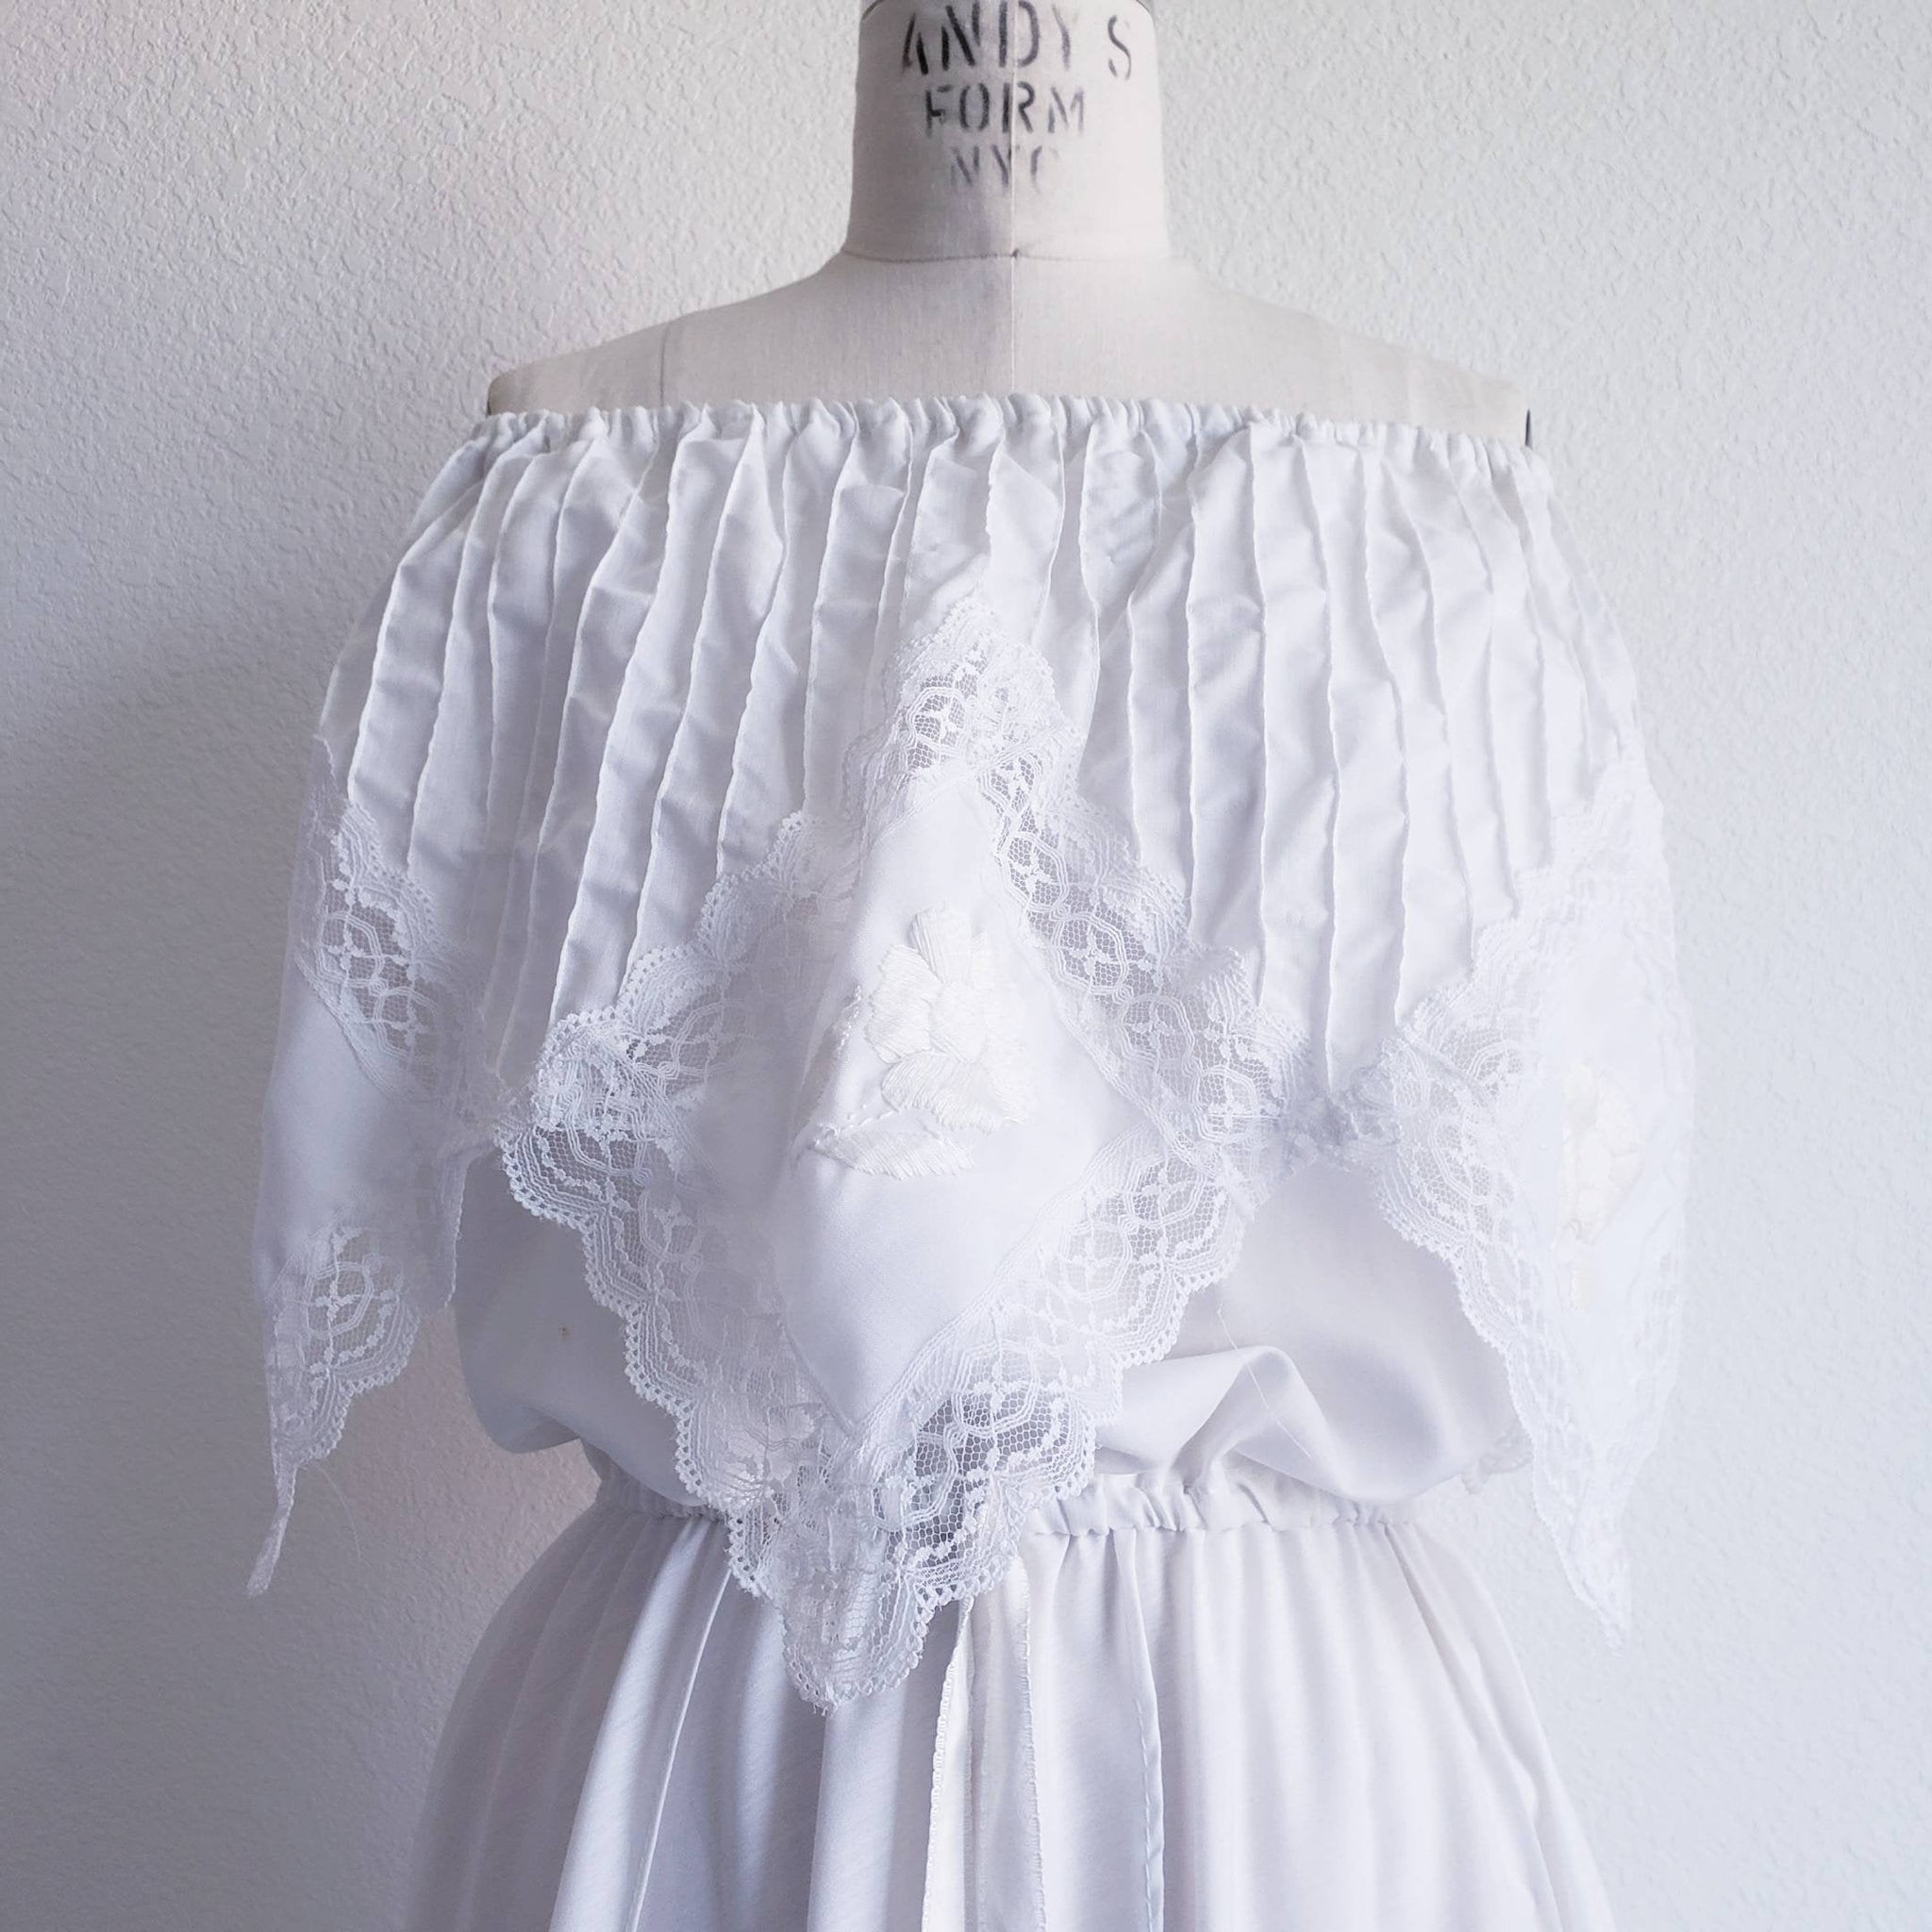 Vintage Off Shoulder White Mexican Style Dress - ChicCityVintage